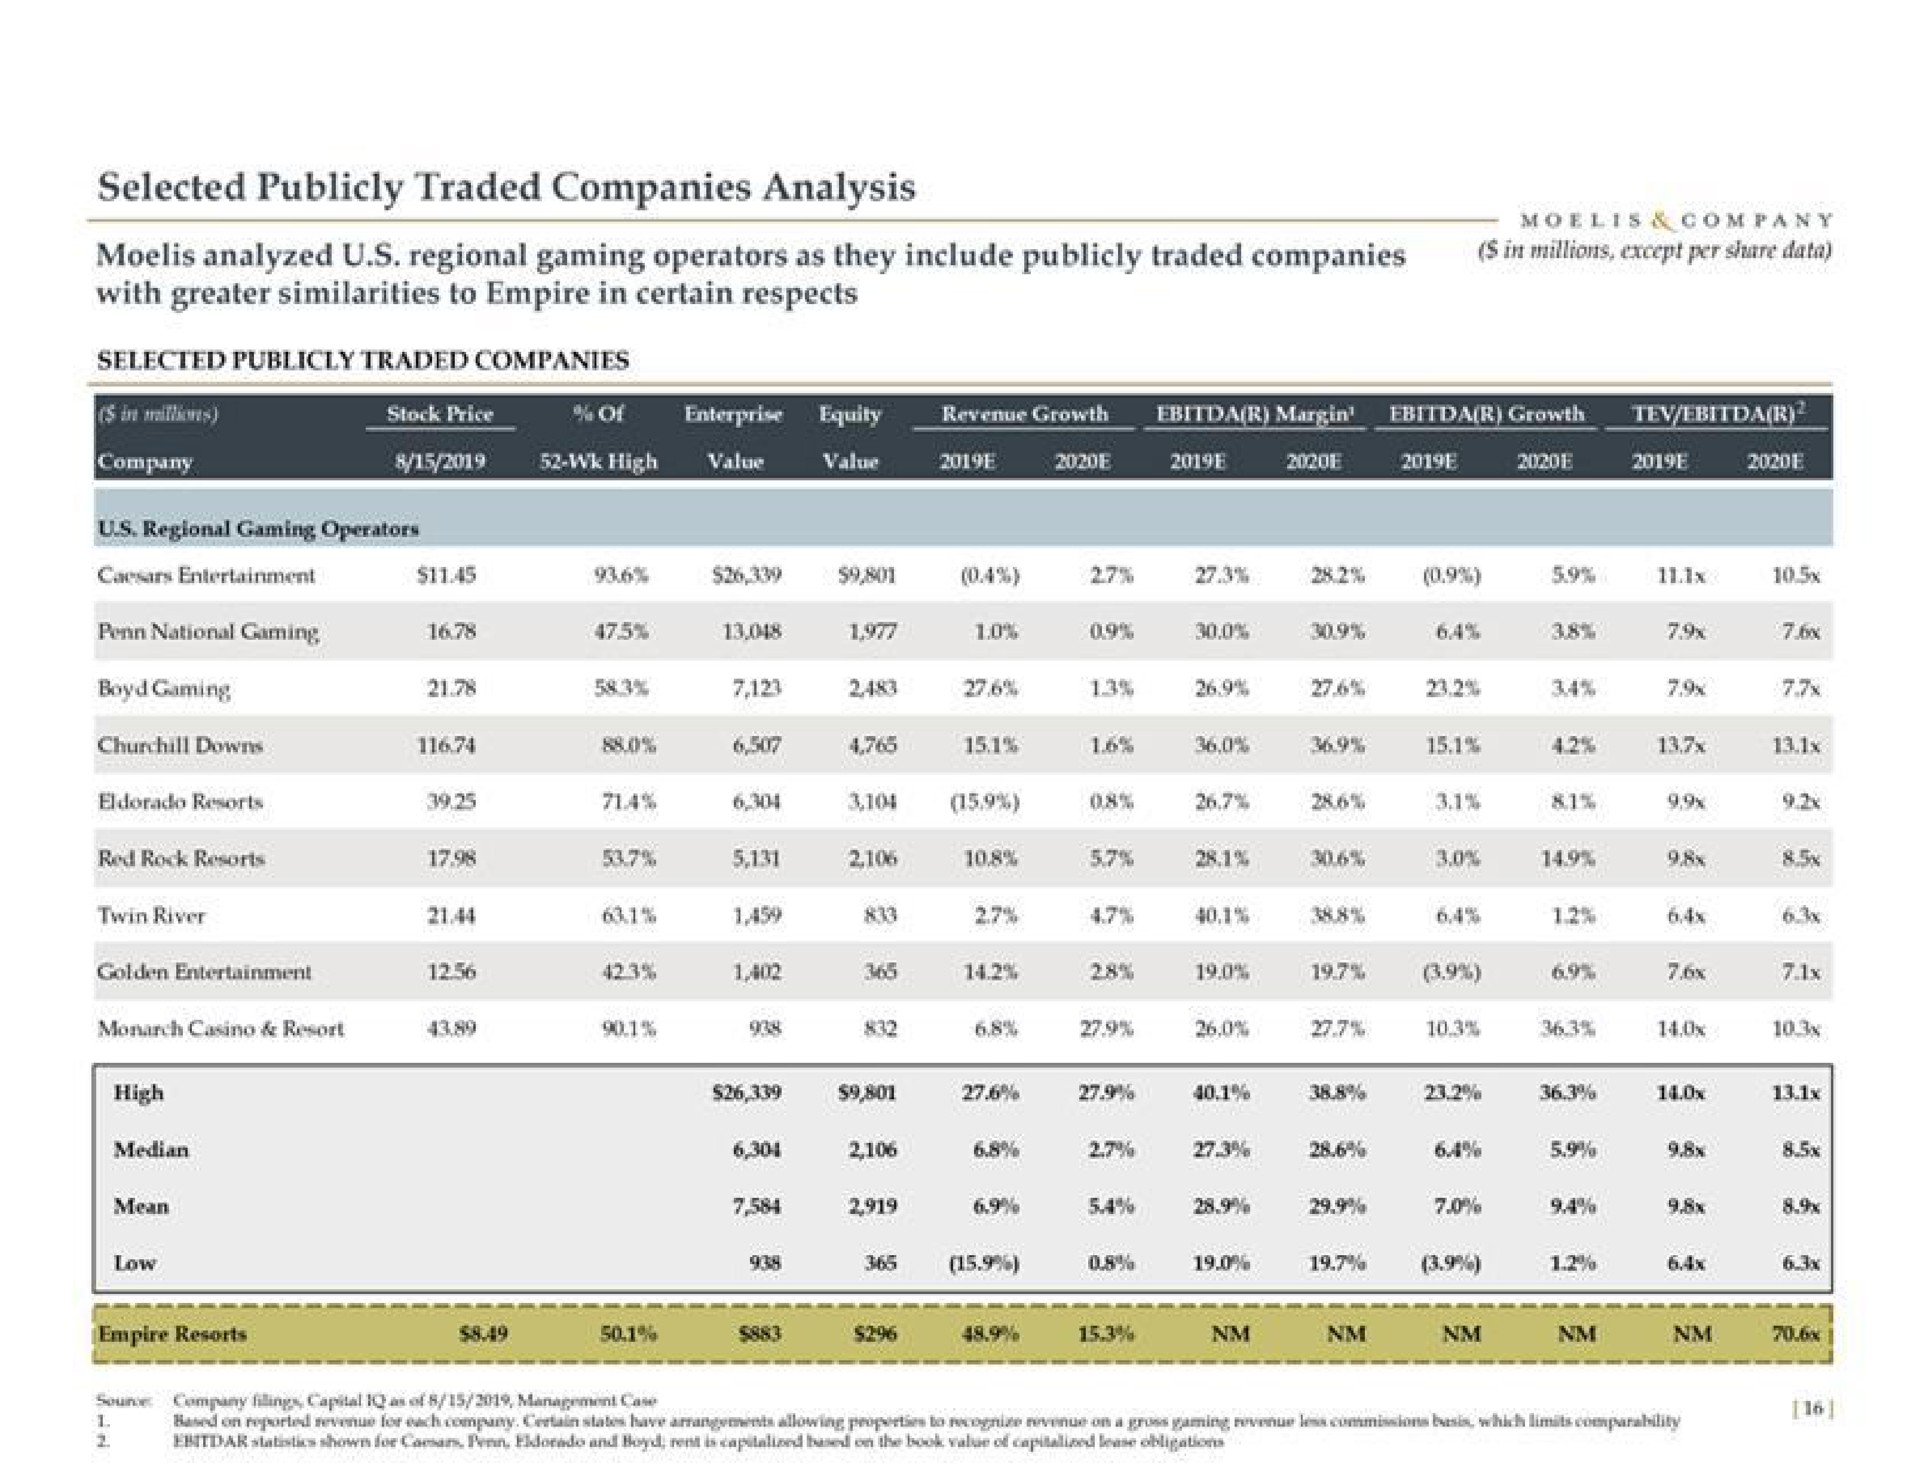 selected publicly traded companies analysis analyzed regional gaming operators as they include publicly traded companies millions except per share data | Moelis & Company